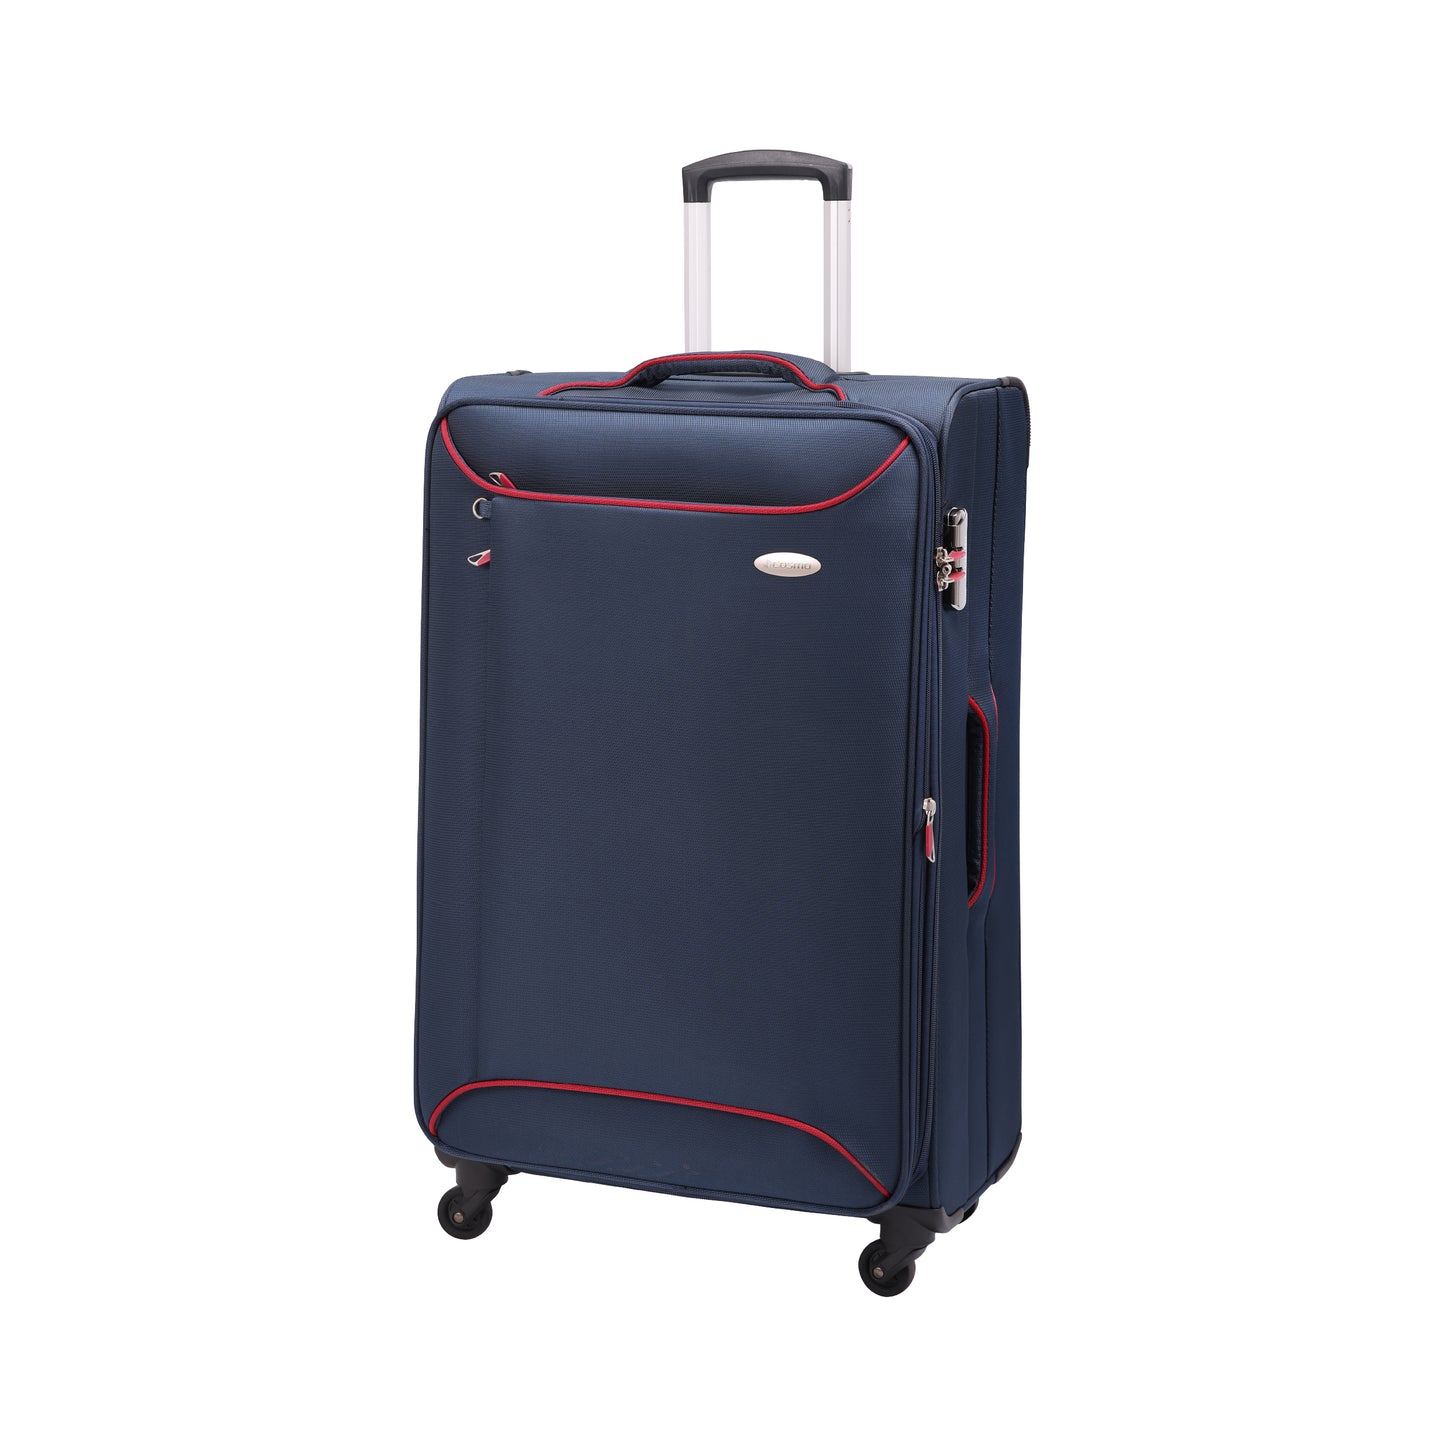 matchmaker ontsnappen Bloedbad Cosmo Featherlite 4W 80 cm Soft Luggage Trolley Case – Cosmo Luggage